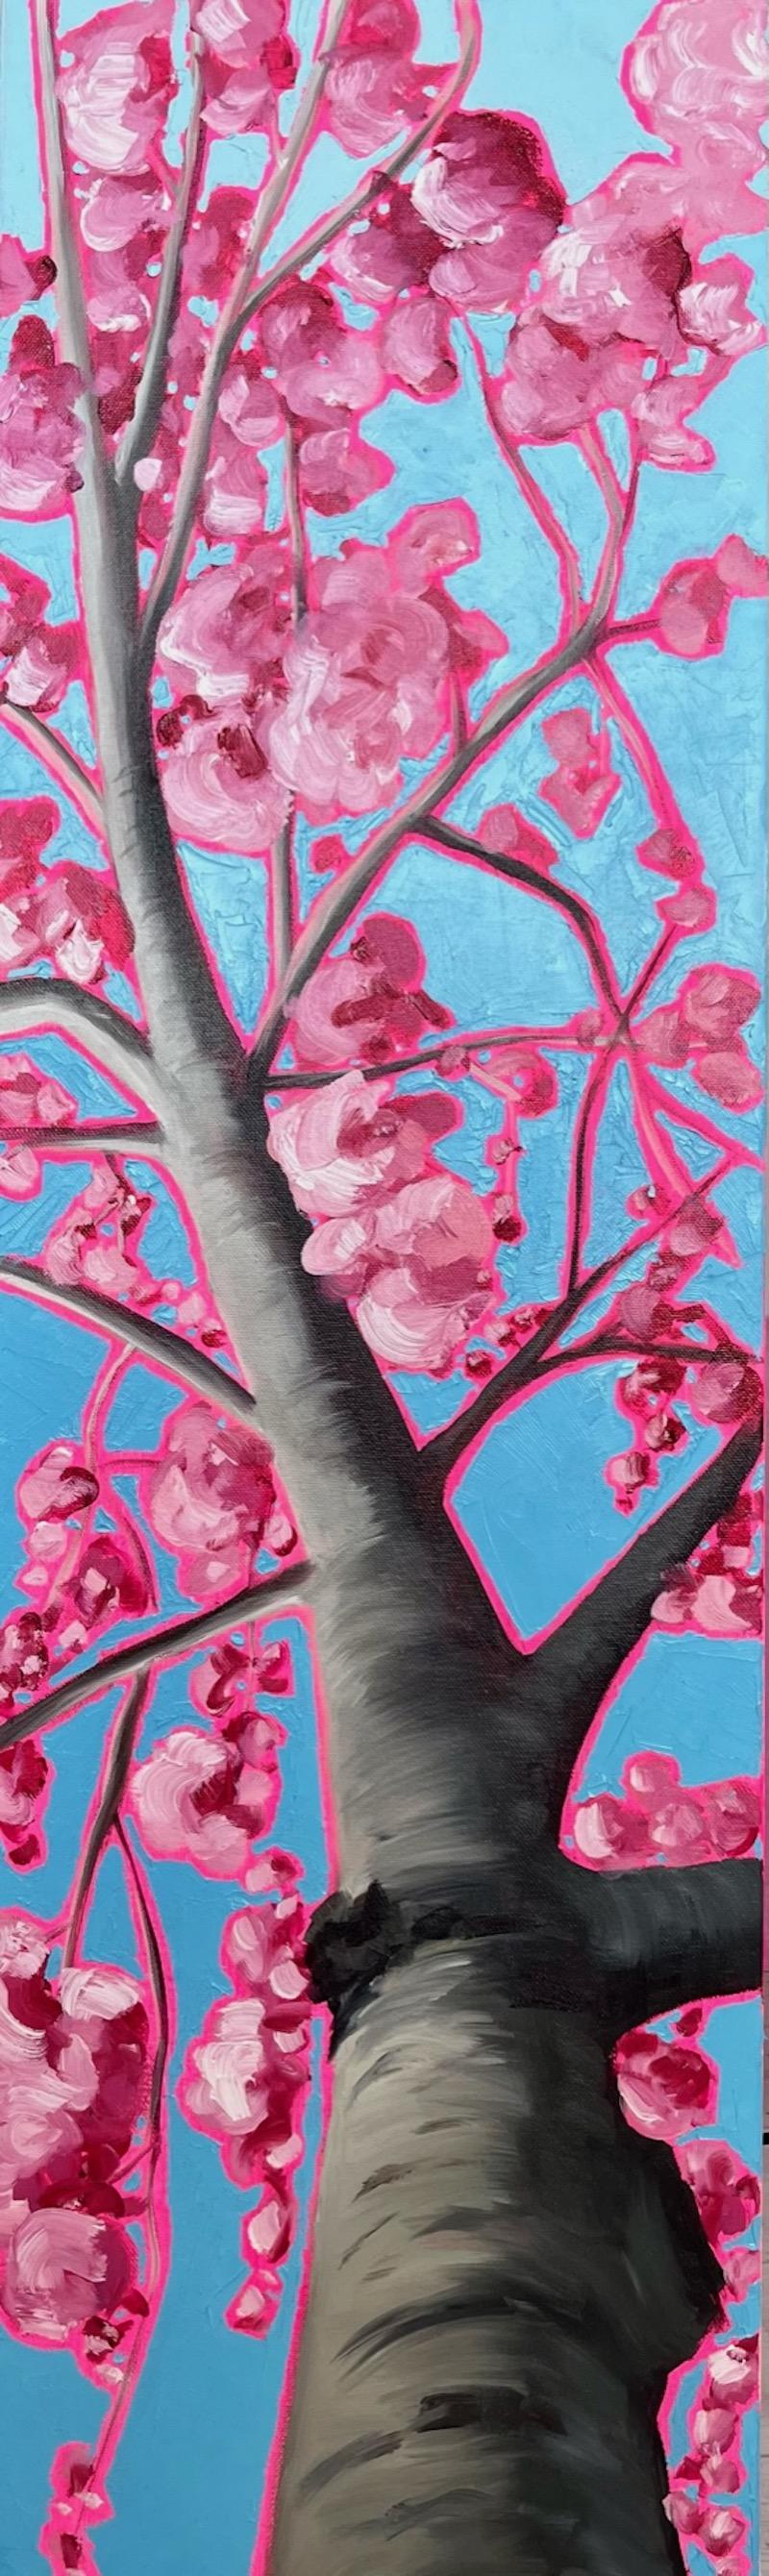 Emily Finch Abstract Painting - Looking up through pink blossom for a kick of happiness